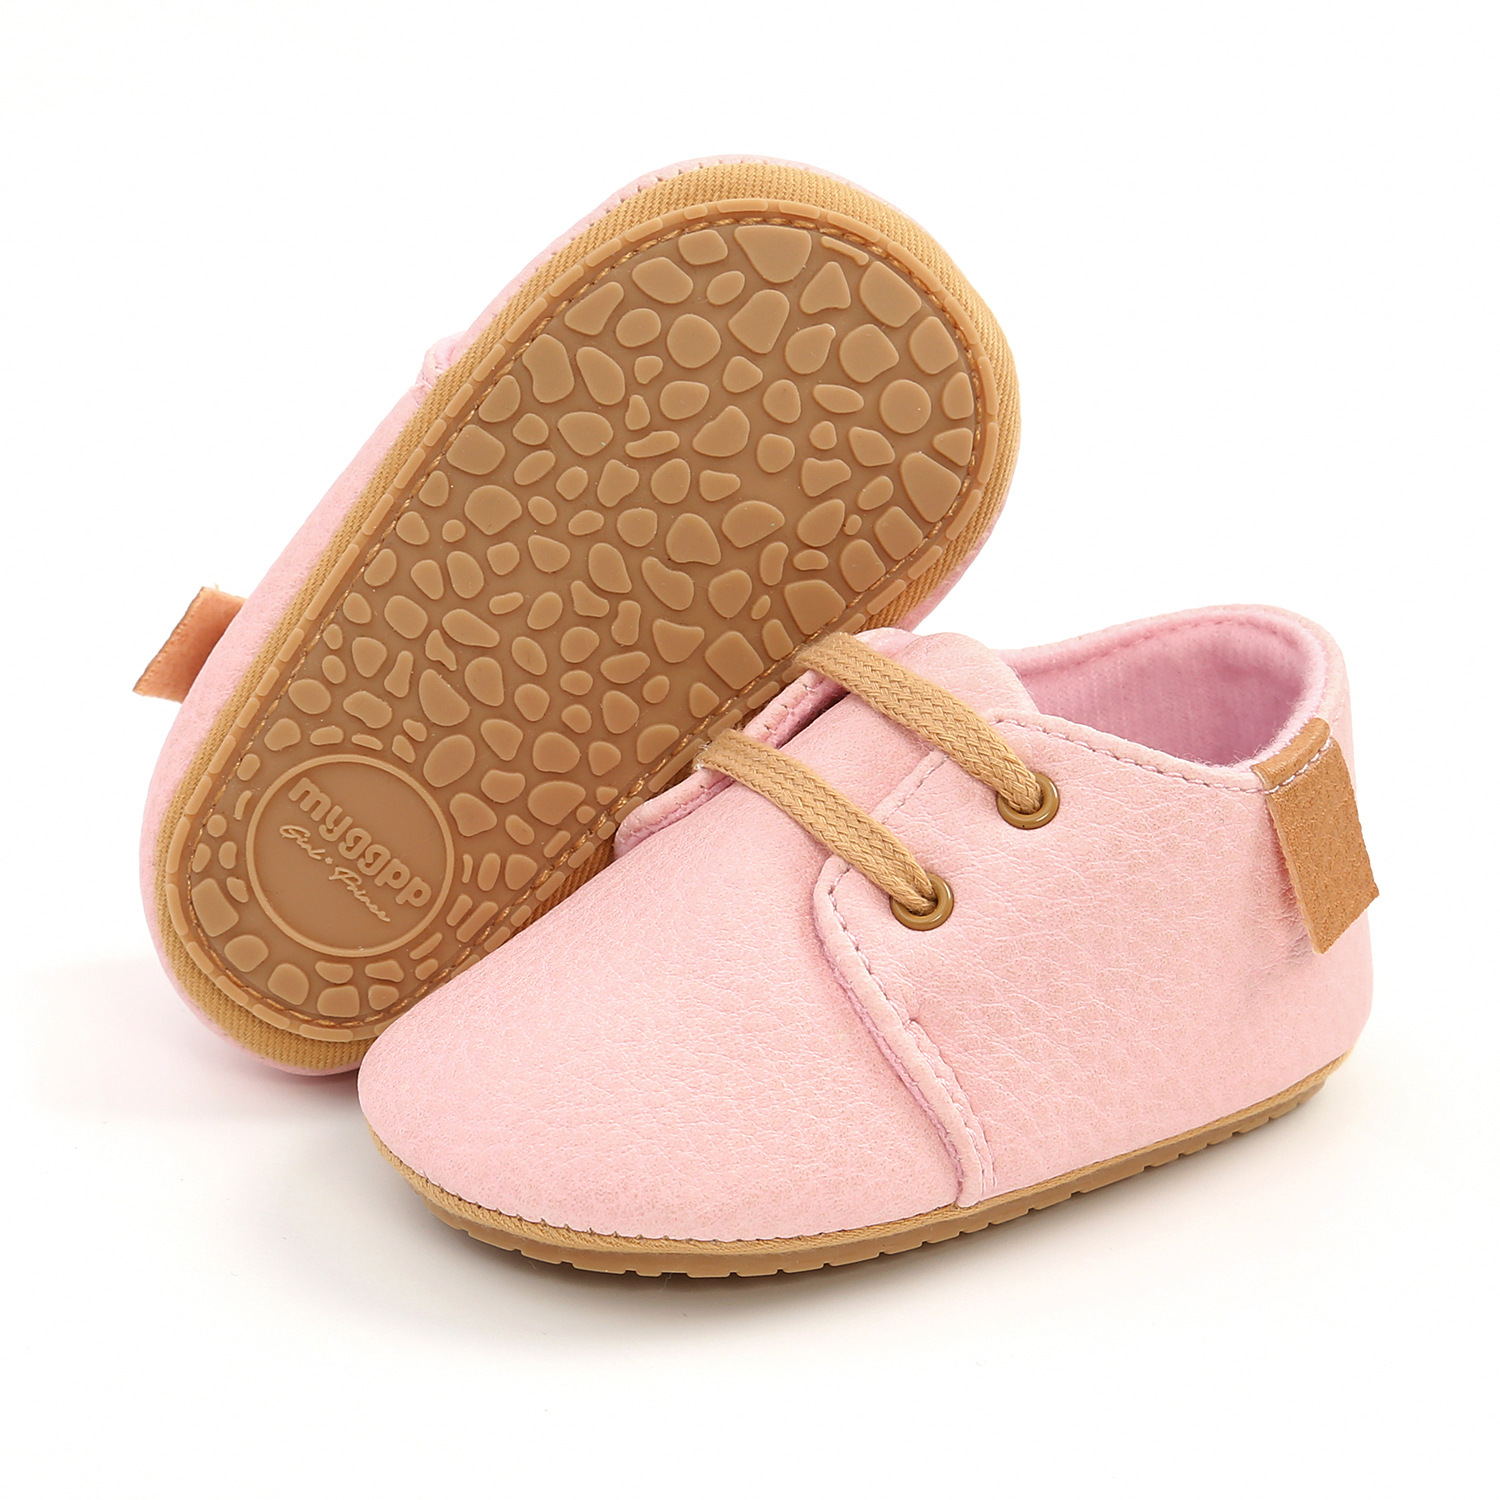 New Baby Shoes Retro Leather Boy Girl Shoes Multicolor Toddler Rubber Sole Anti-slip First Walkers Infant Newborn Moccasins